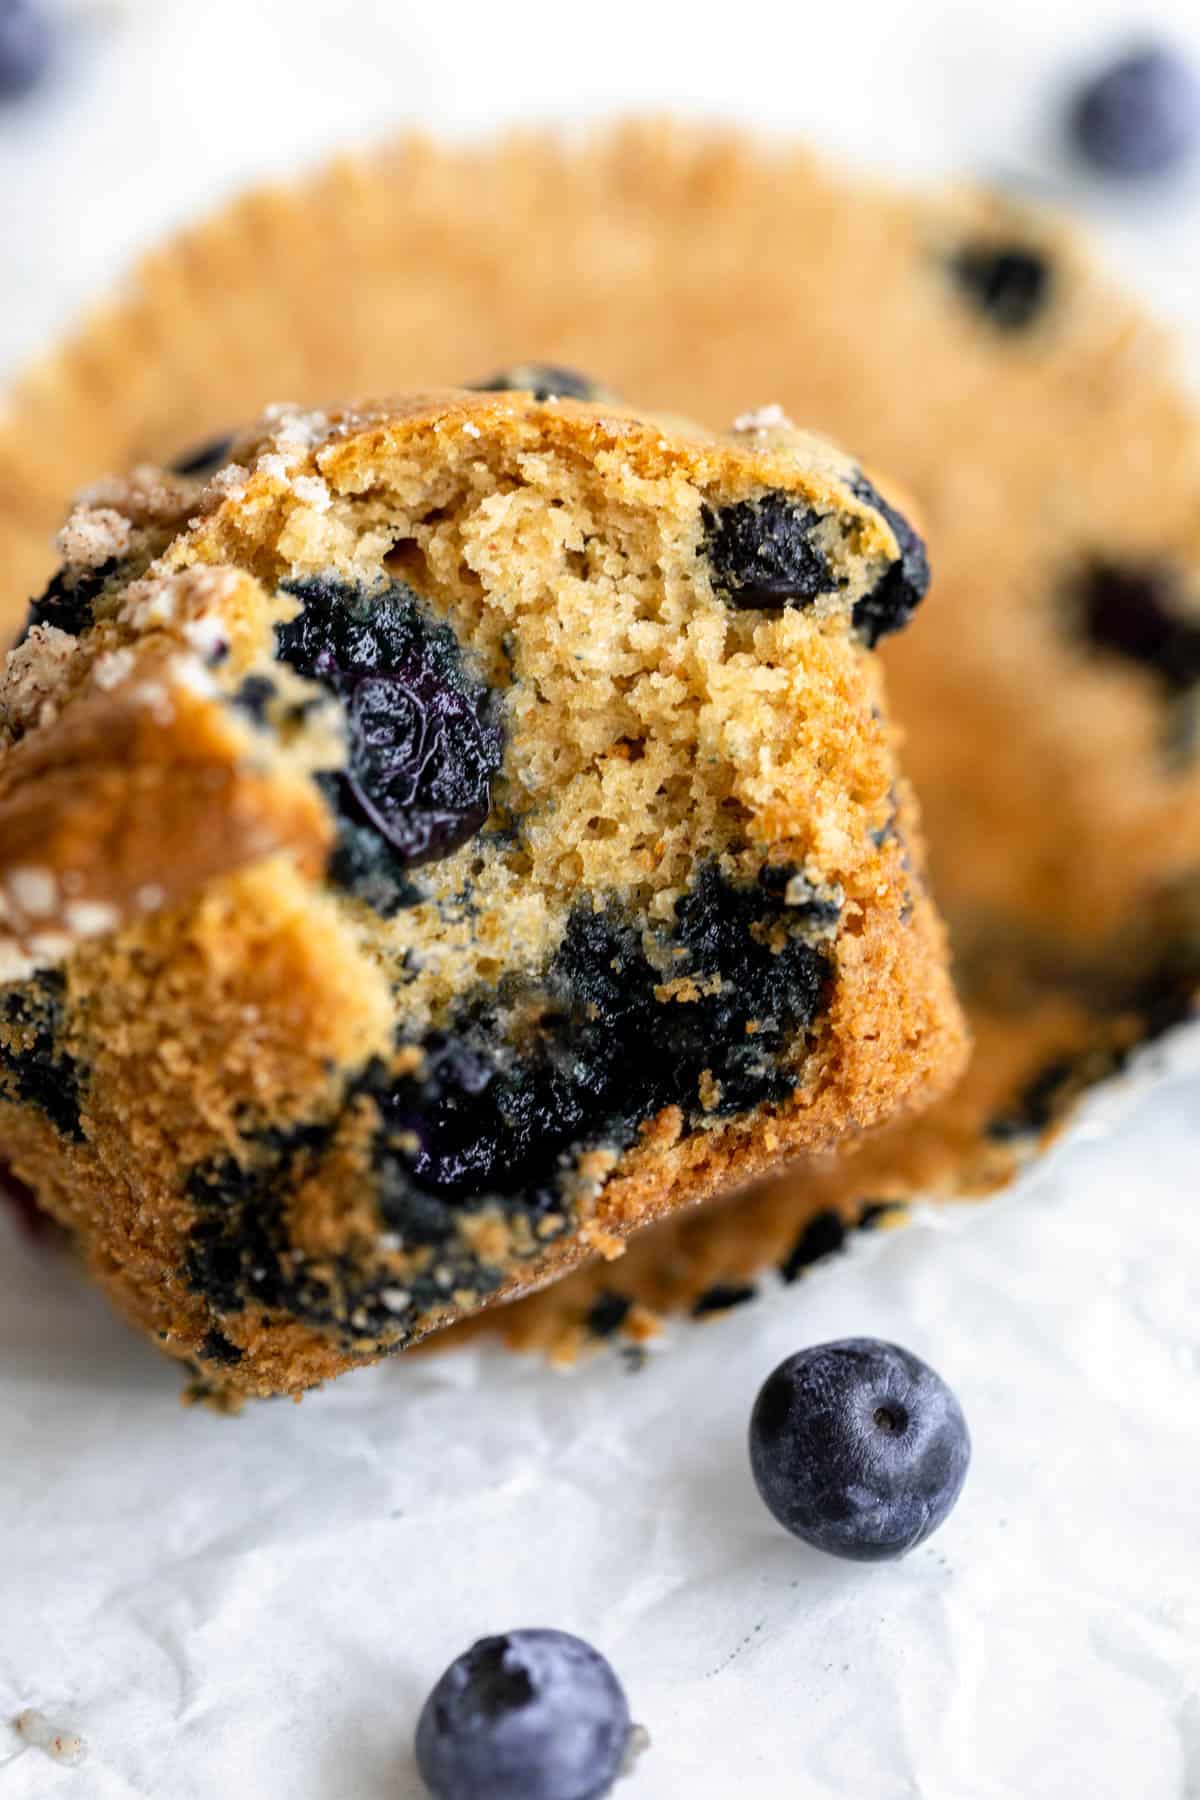 one gluten free blueberry muffin with a bite taken out